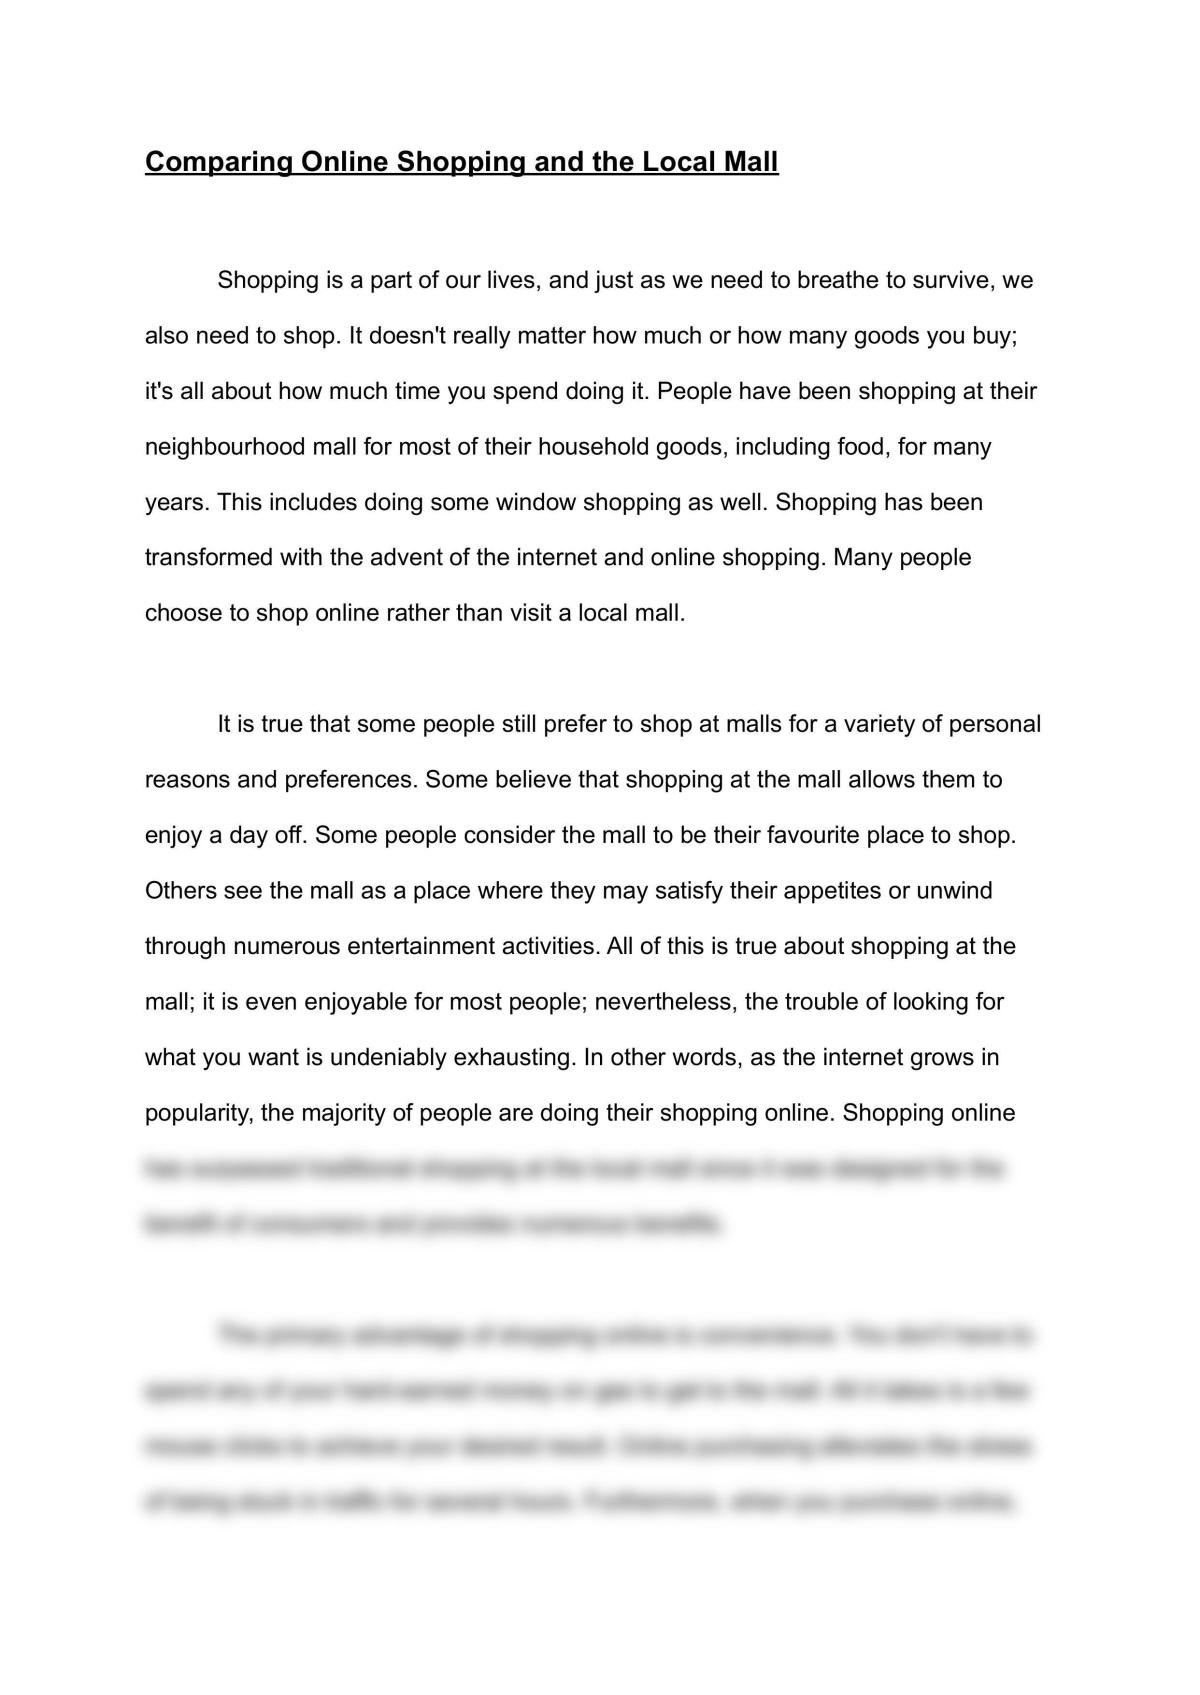 shopping mall college essay